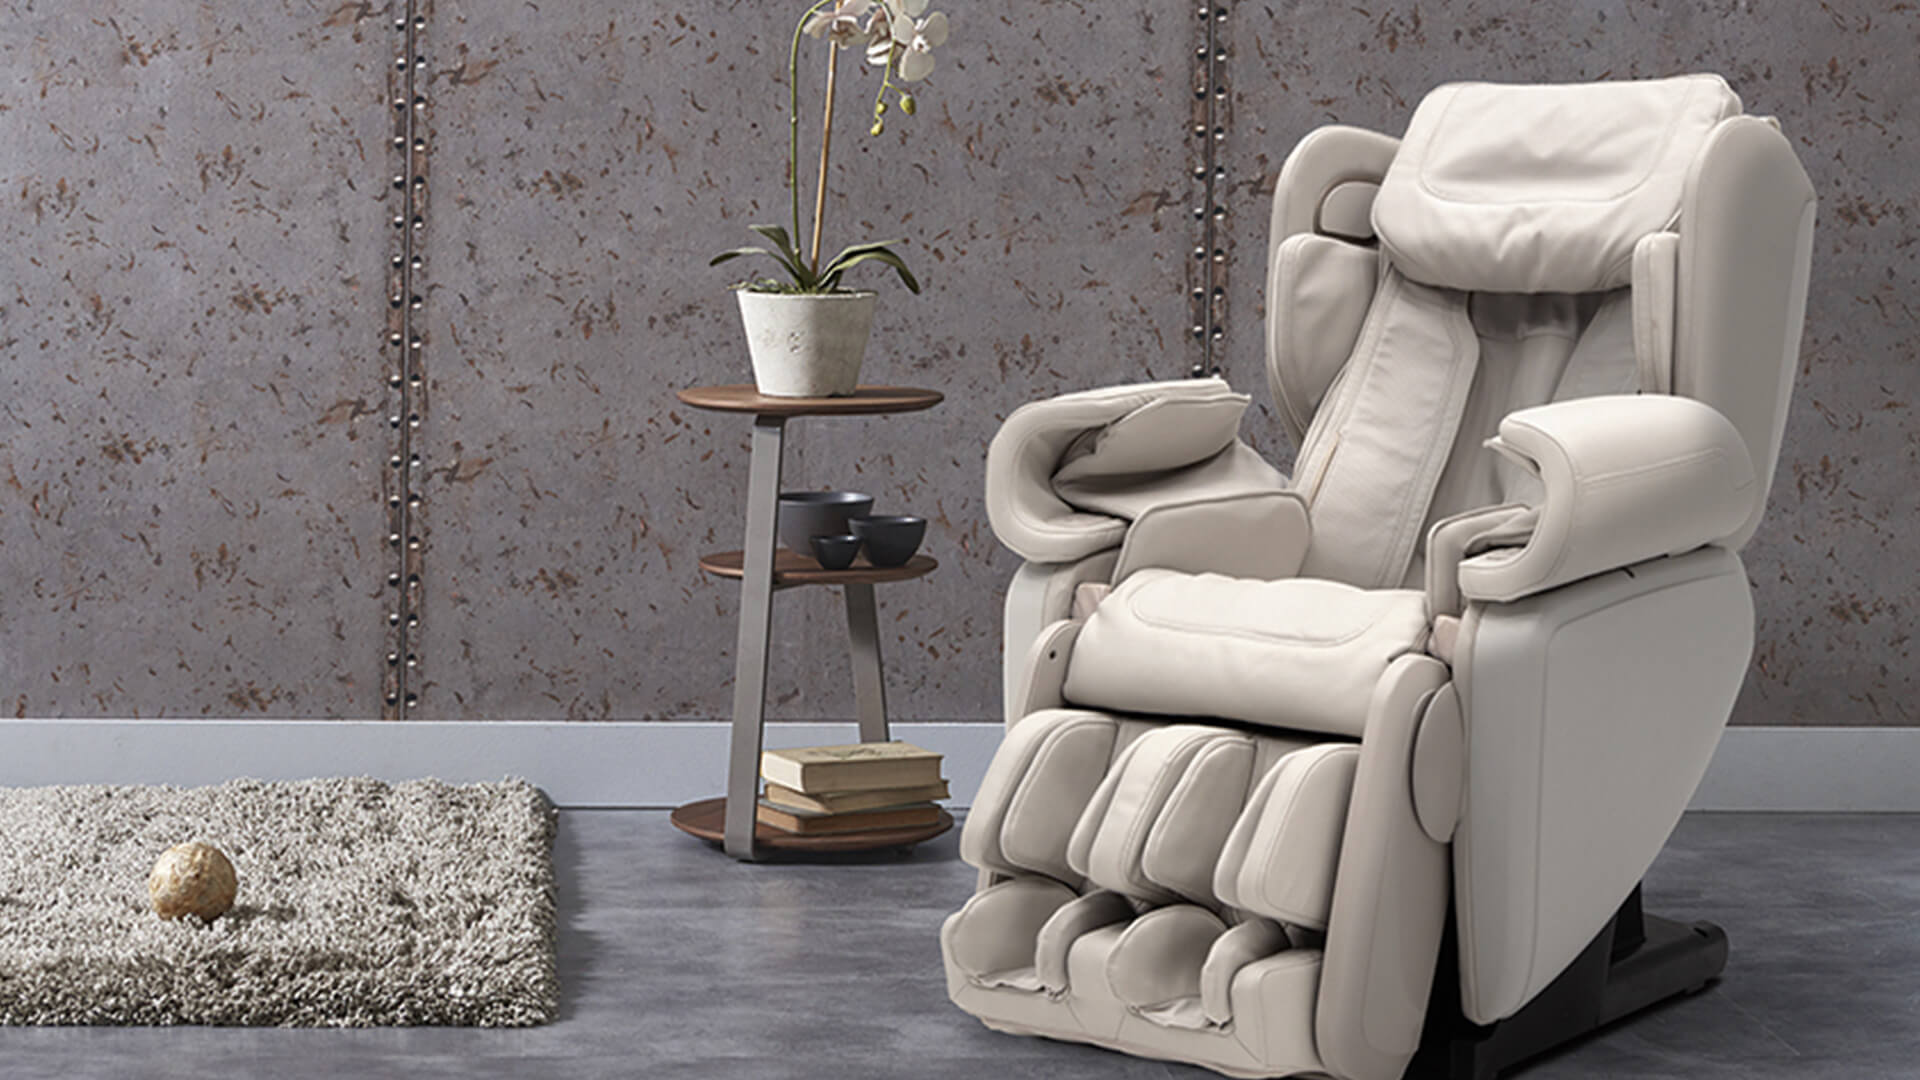 Kagra compact massage chair in living room